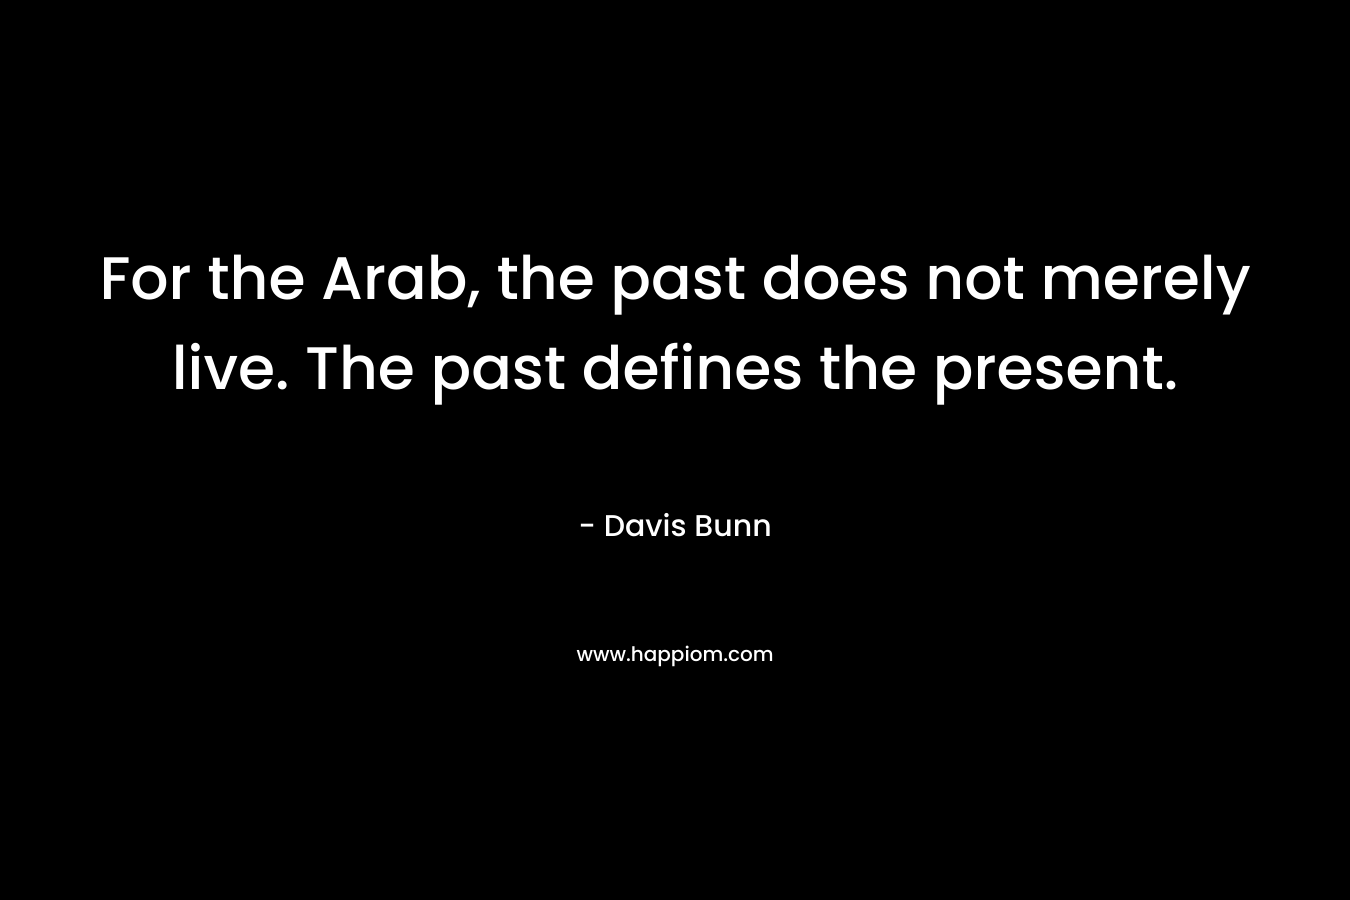 For the Arab, the past does not merely live. The past defines the present.